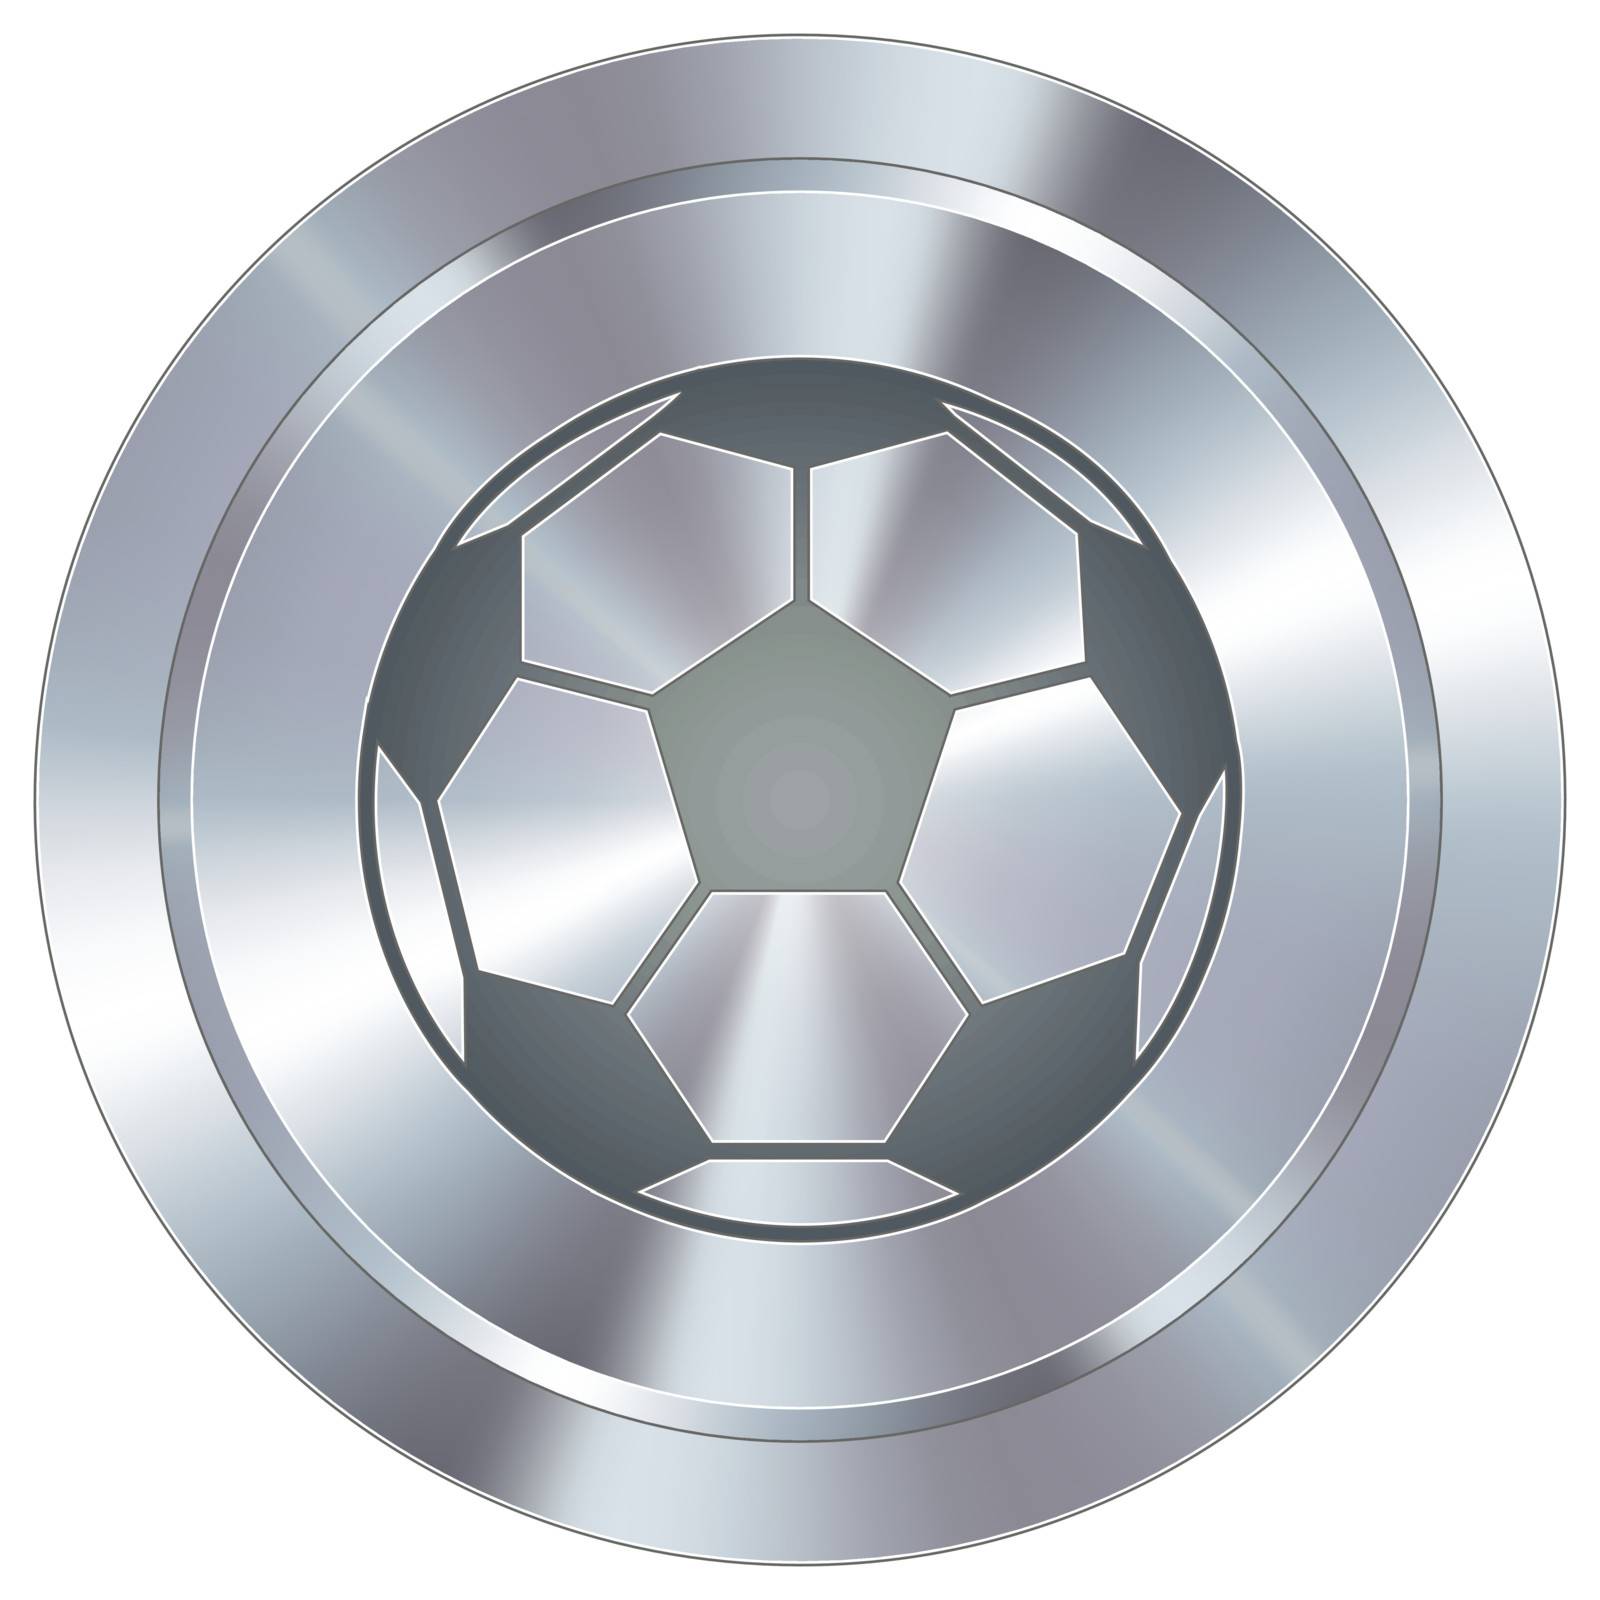 Soccer industrial button by lhfgraphics